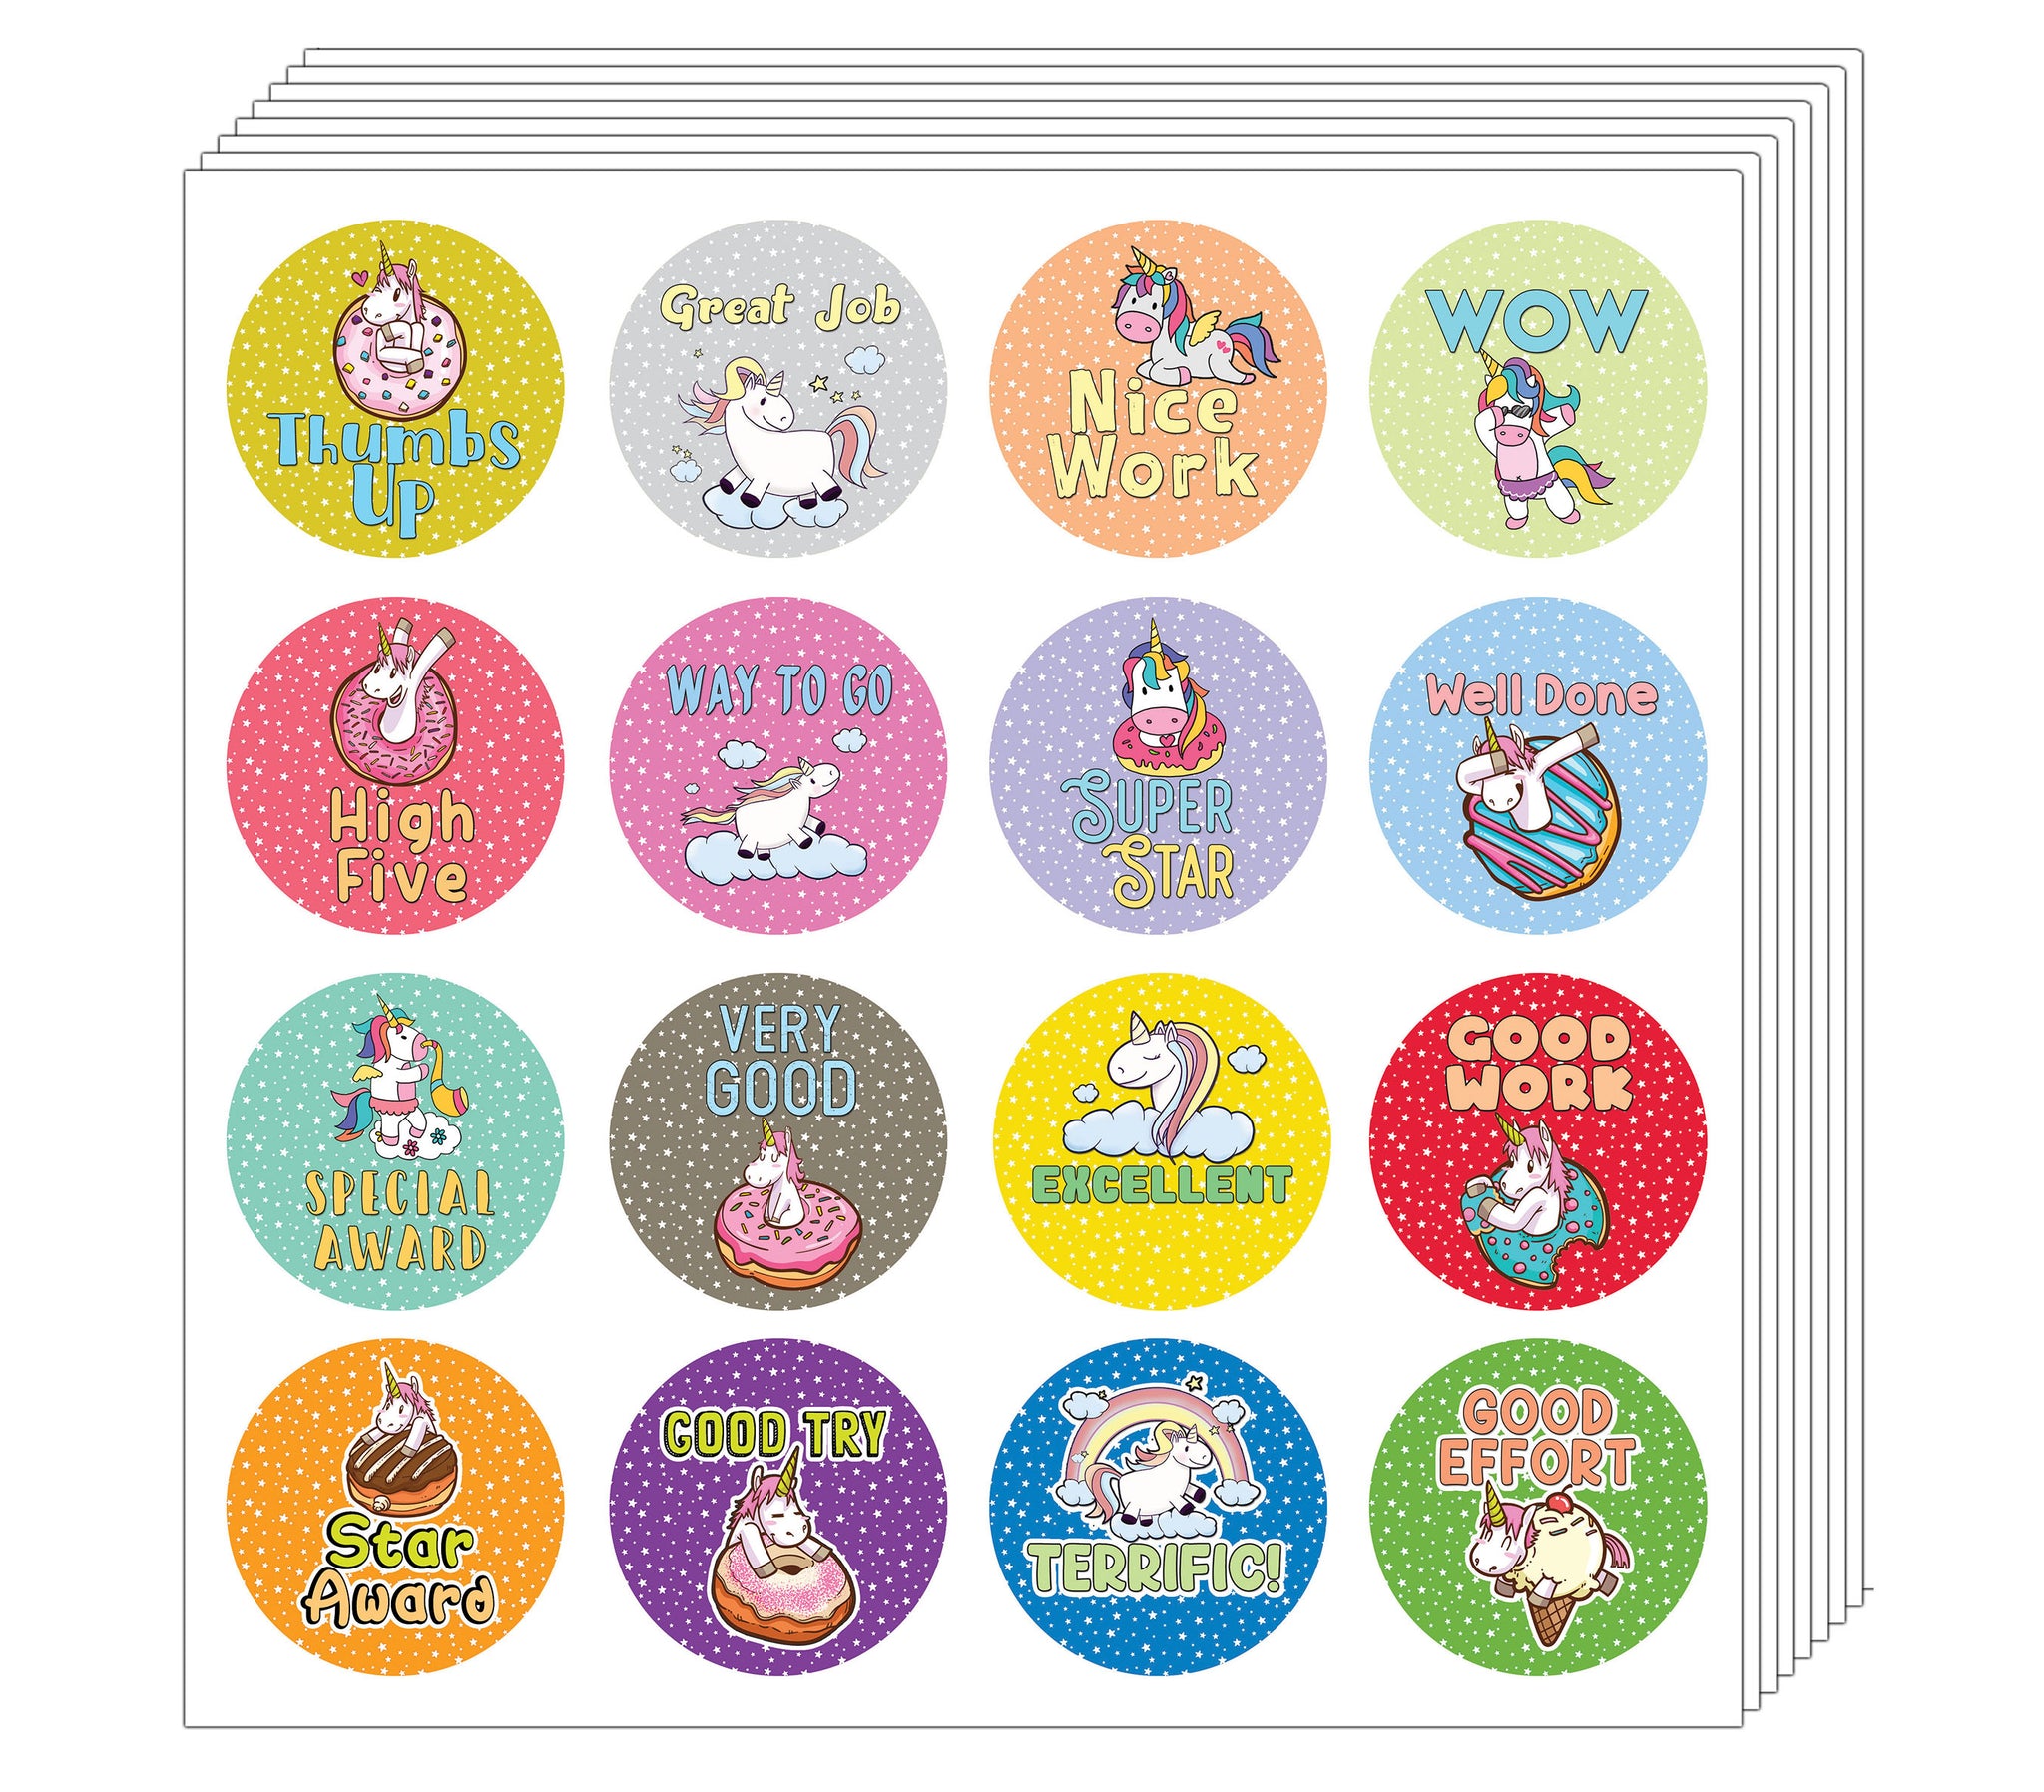 Creanoso Unicorn Stickers Series 4 - Classroom Rewards (20-Sheet) - Premium Quality Gift Ideas for Children, Teens, & Adults for All Occasions - Stocking Stuffers Party Favor & Giveaways